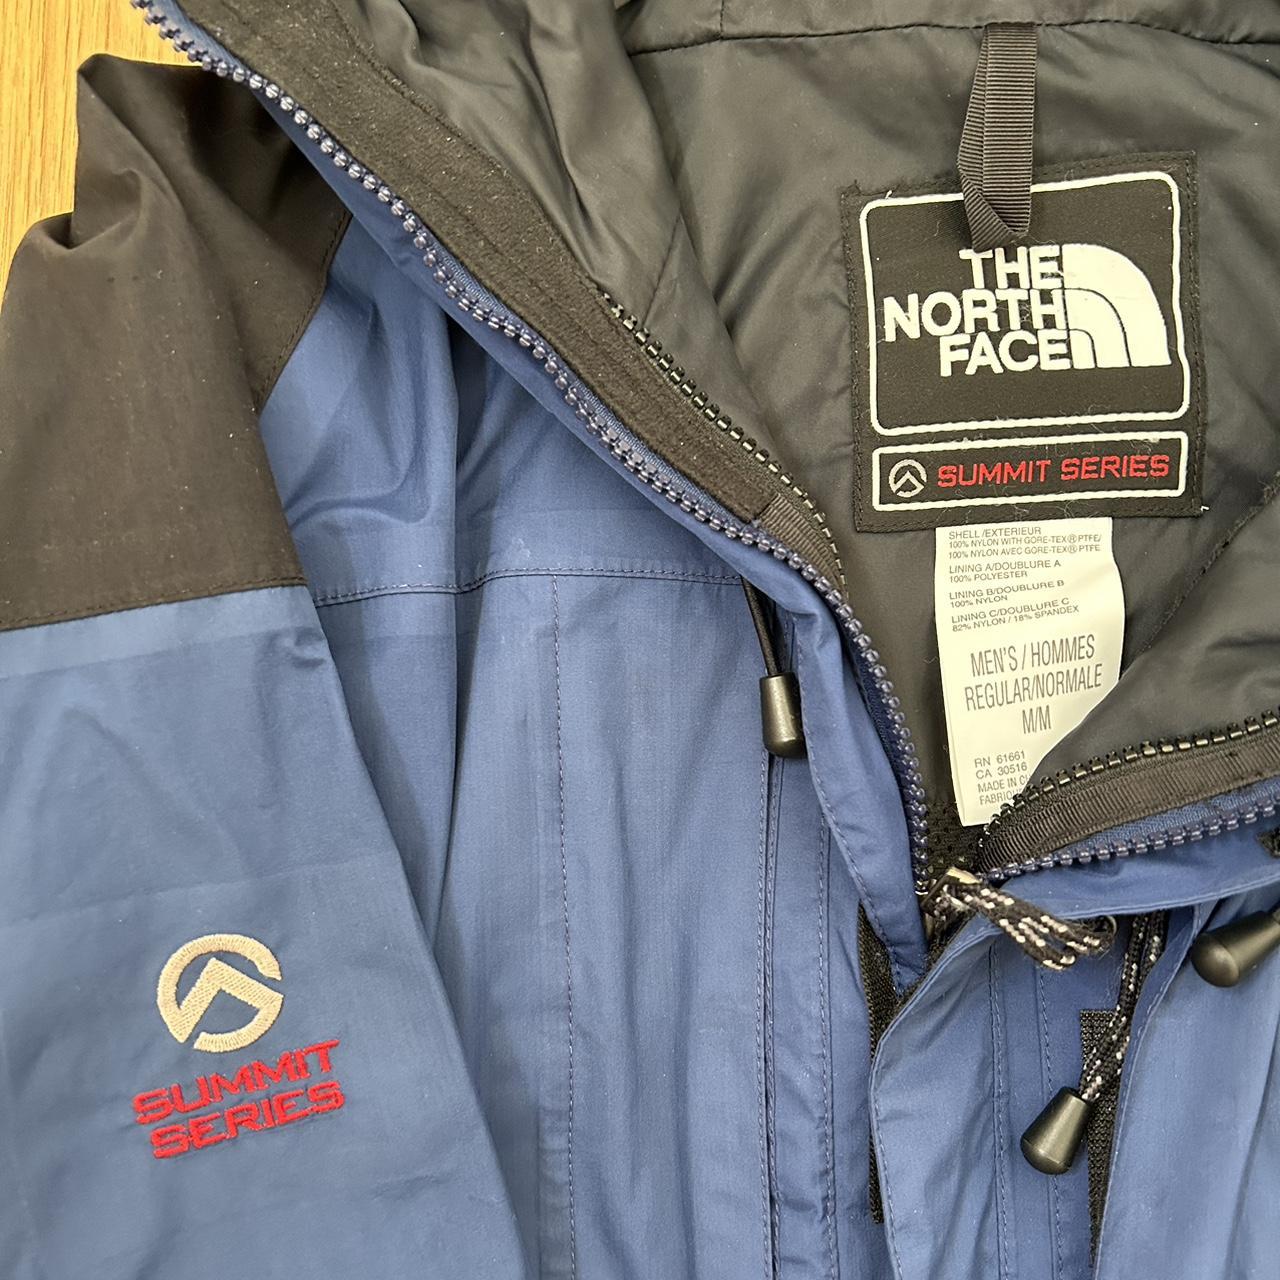 The North Face Gore-Tex XCR Summit, Series Raincoat